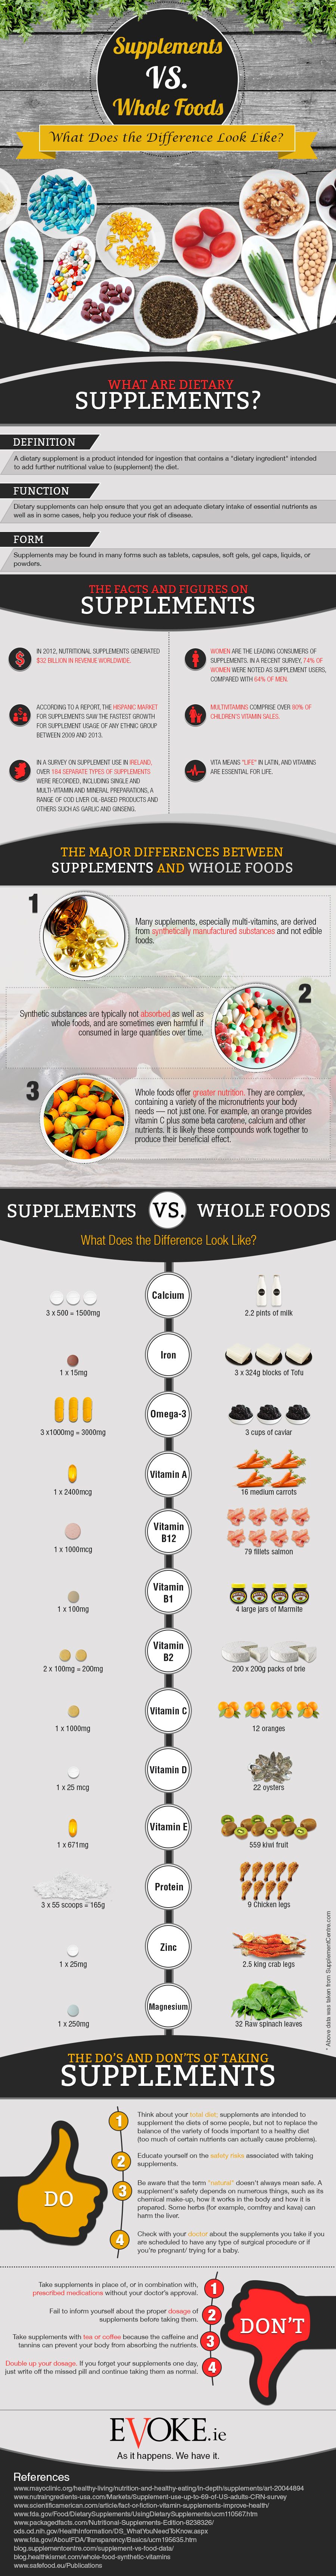 Supplements vs. Whole Foods: What Does the Difference Look Like